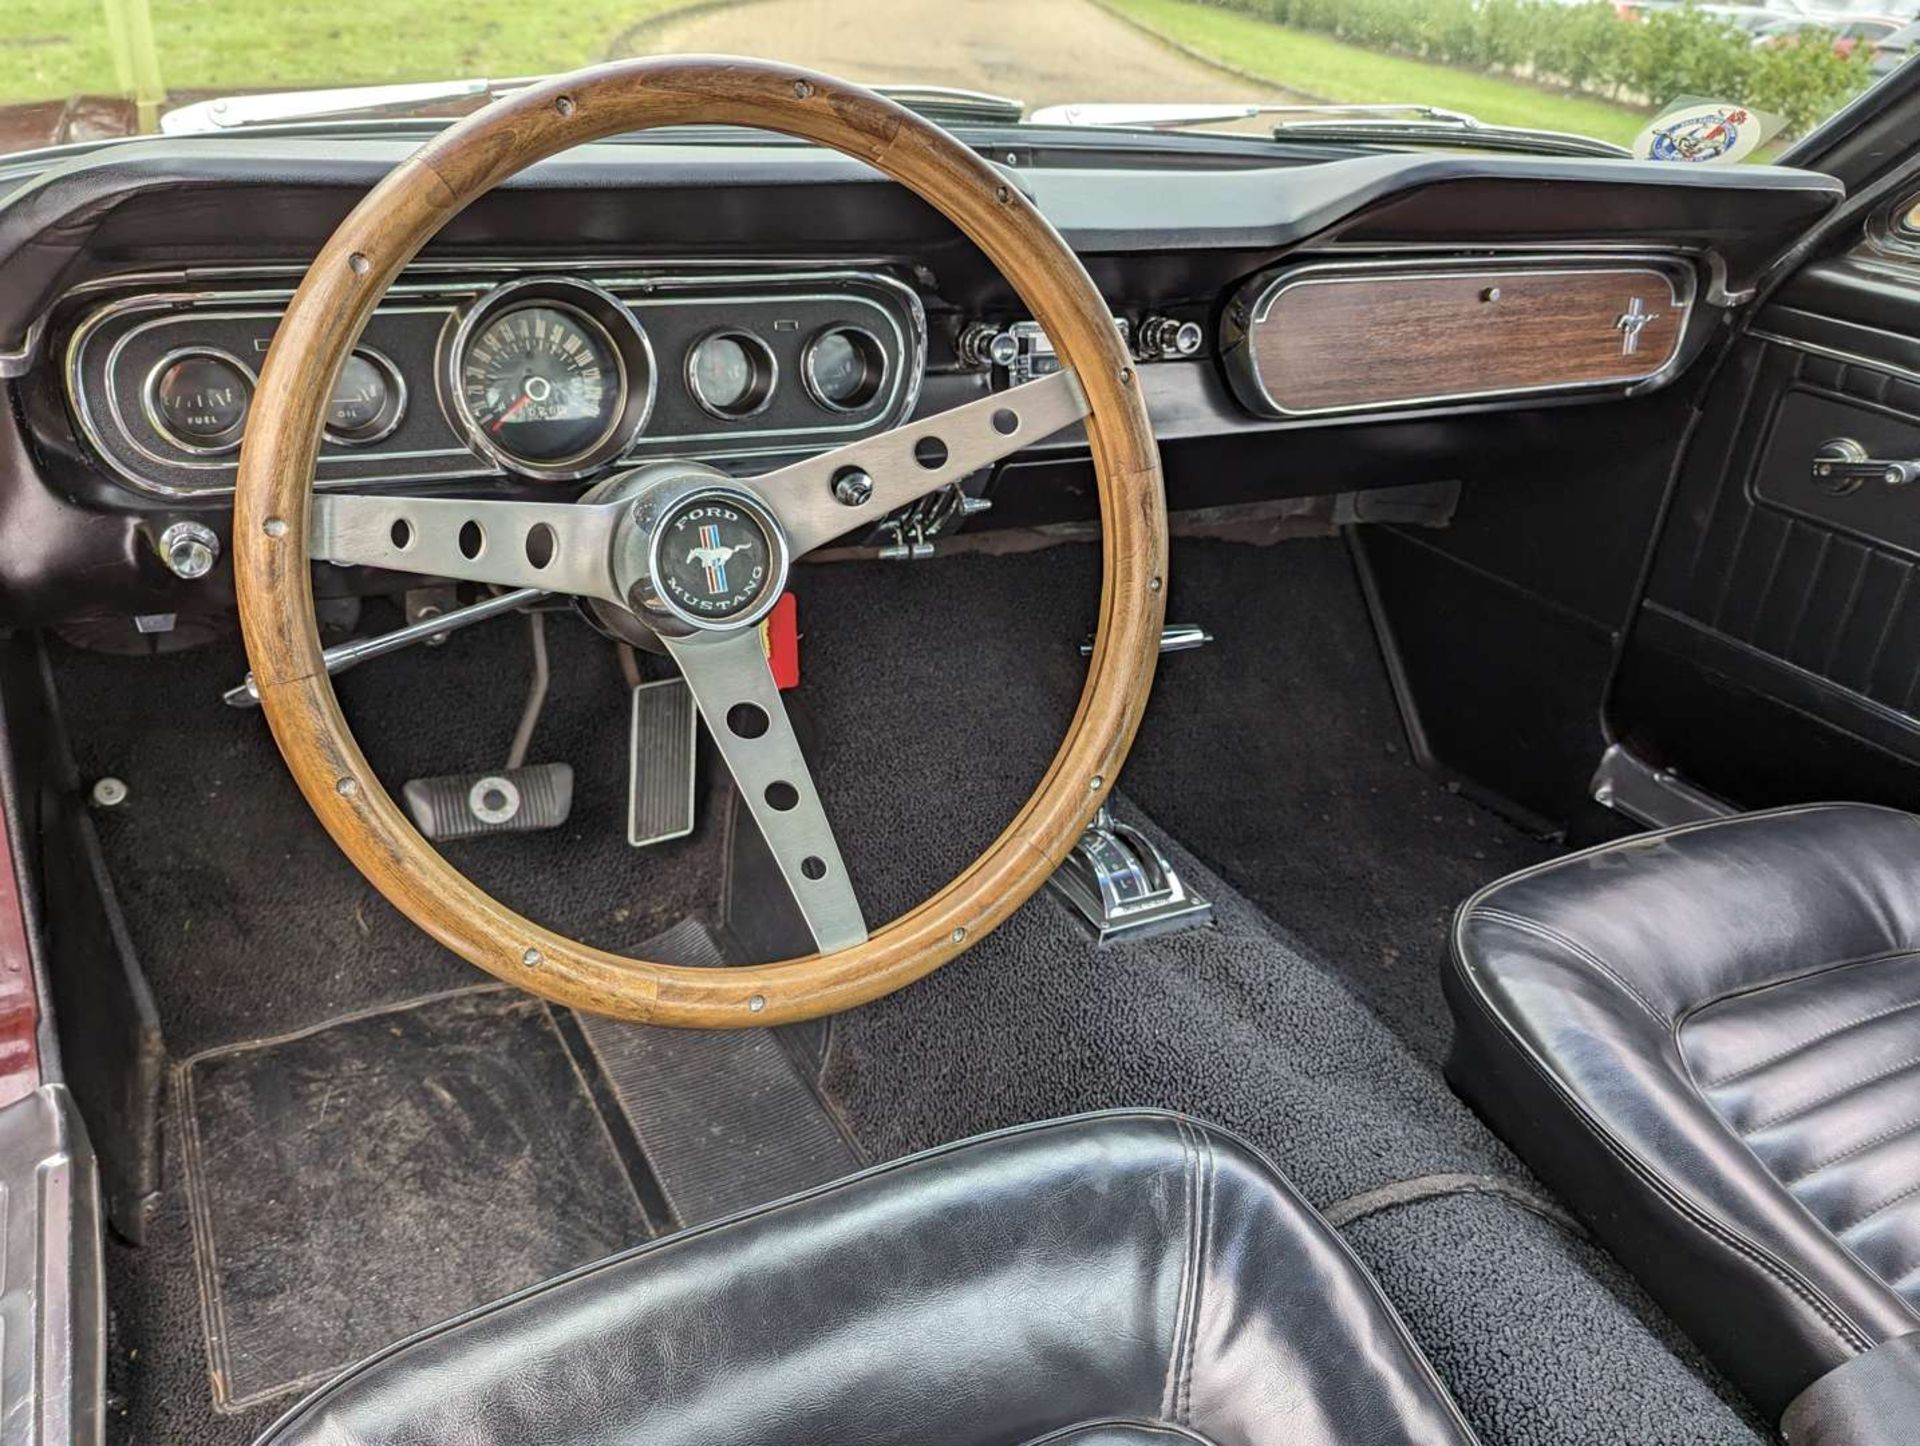 1965 FORD MUSTANG 5.0 V8 FASTBACK AUTO LHD - Image 10 of 30